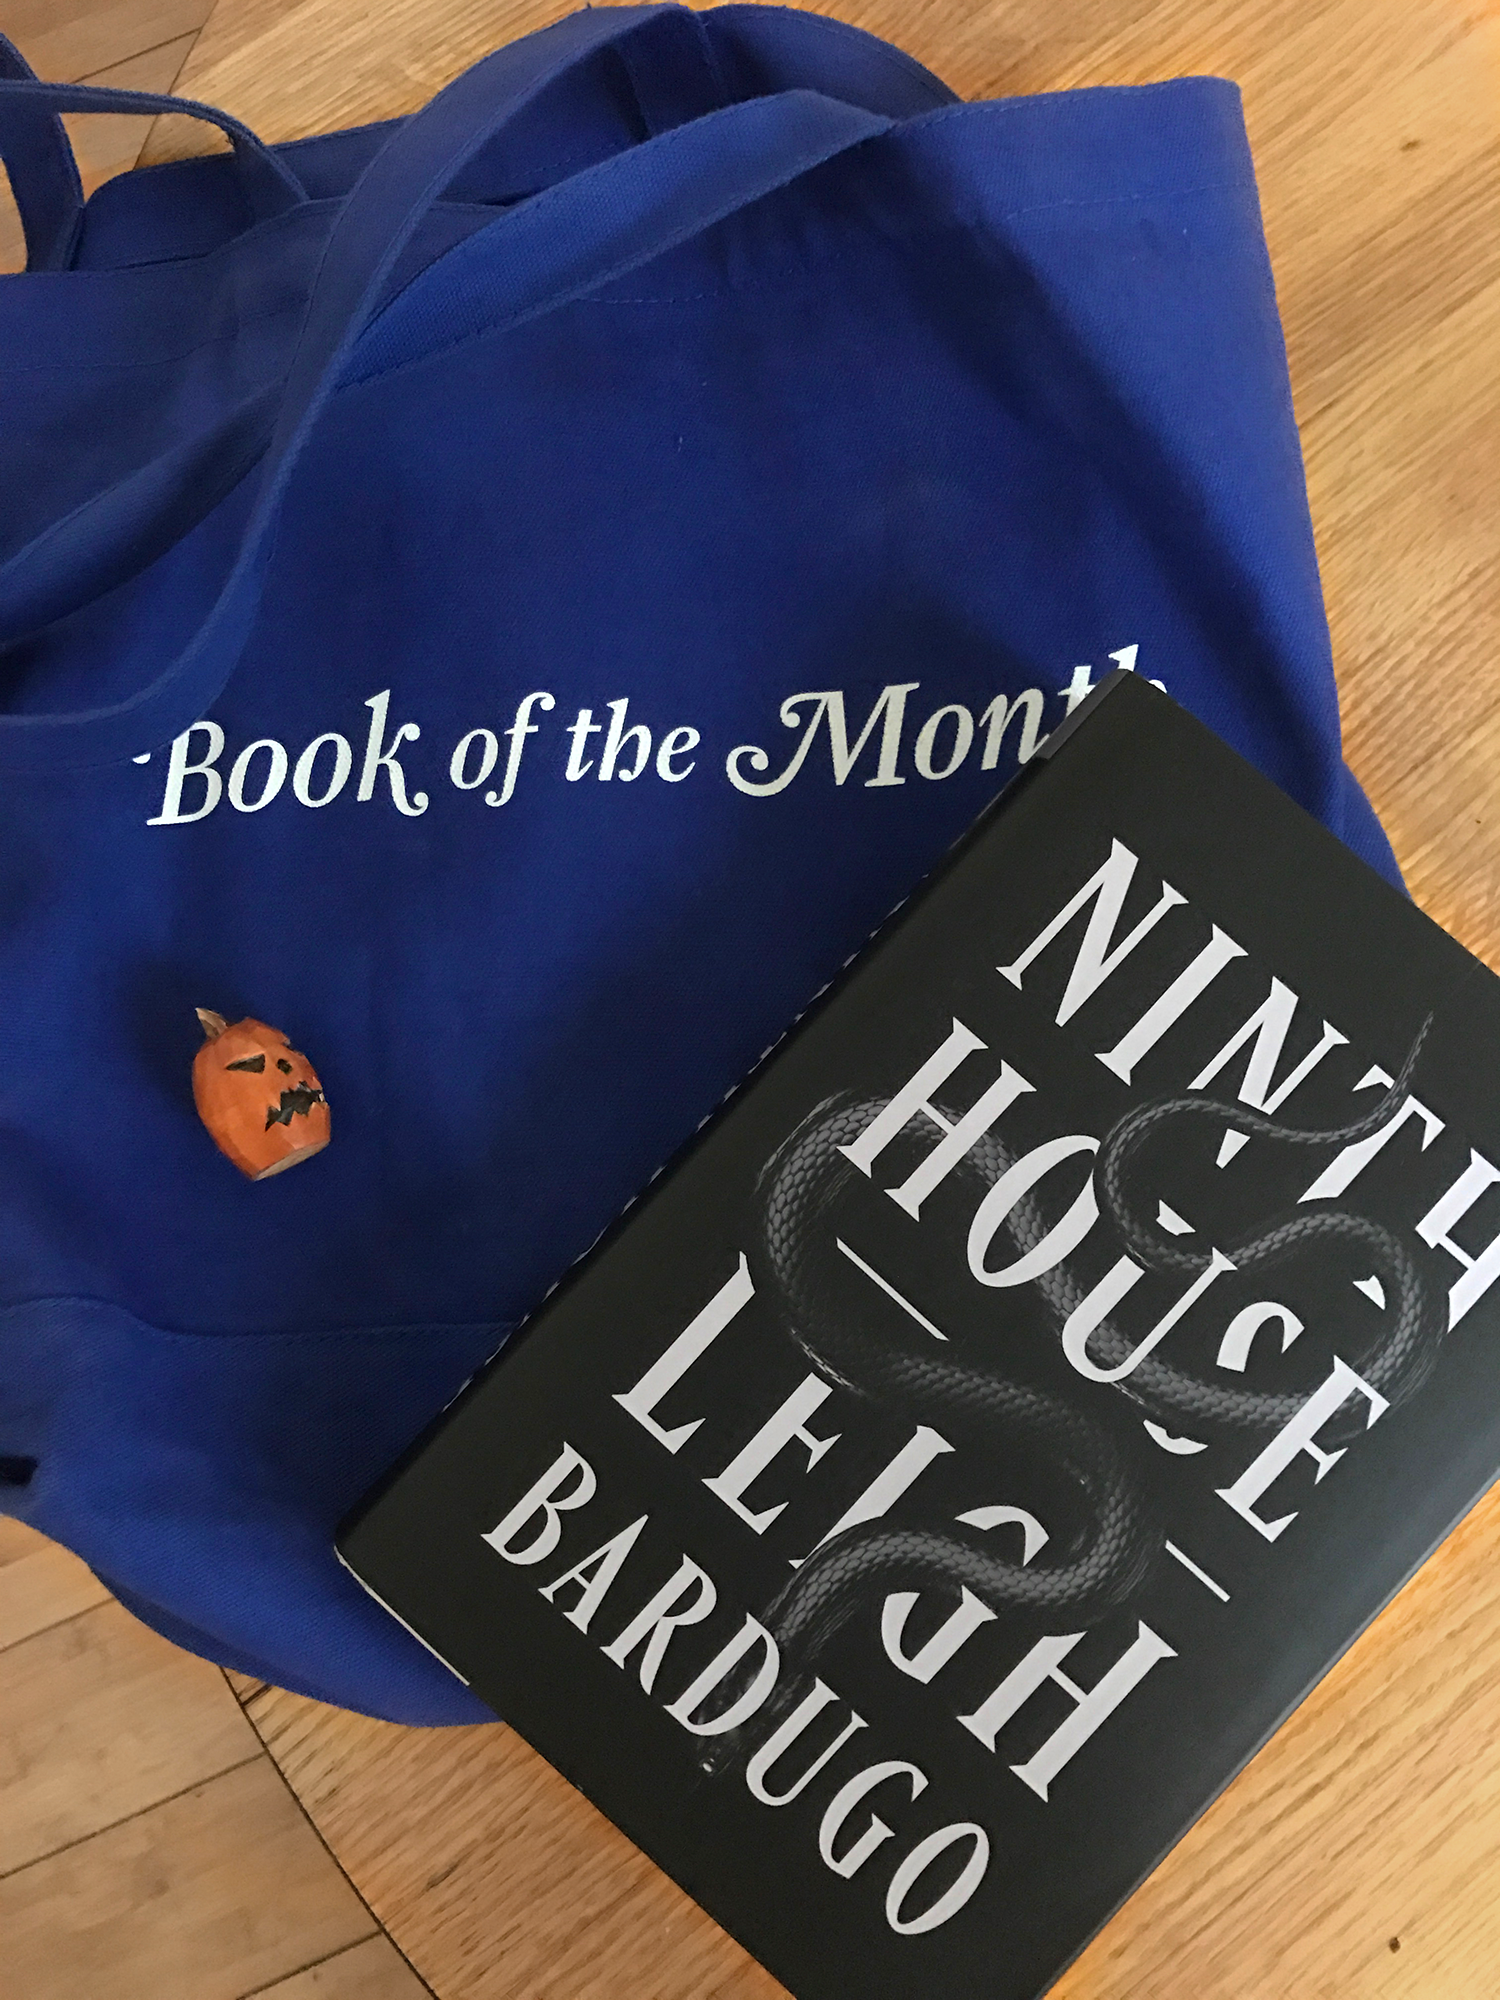 Bek&#x27;s Book of the Month tote and copy of Ninth House